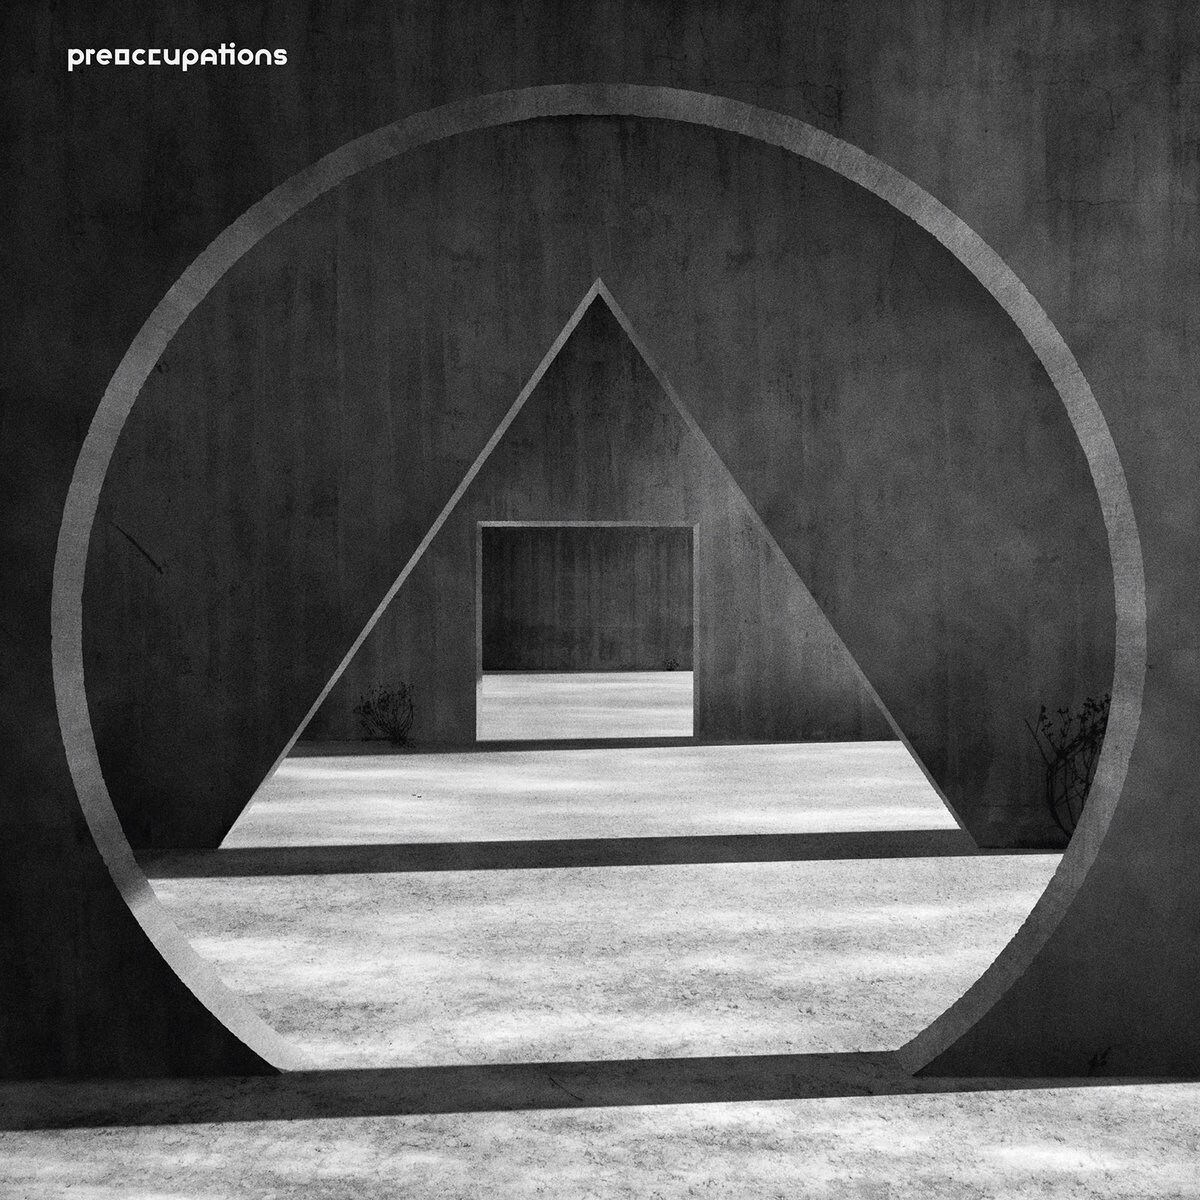 8. Preoccupations - New Material